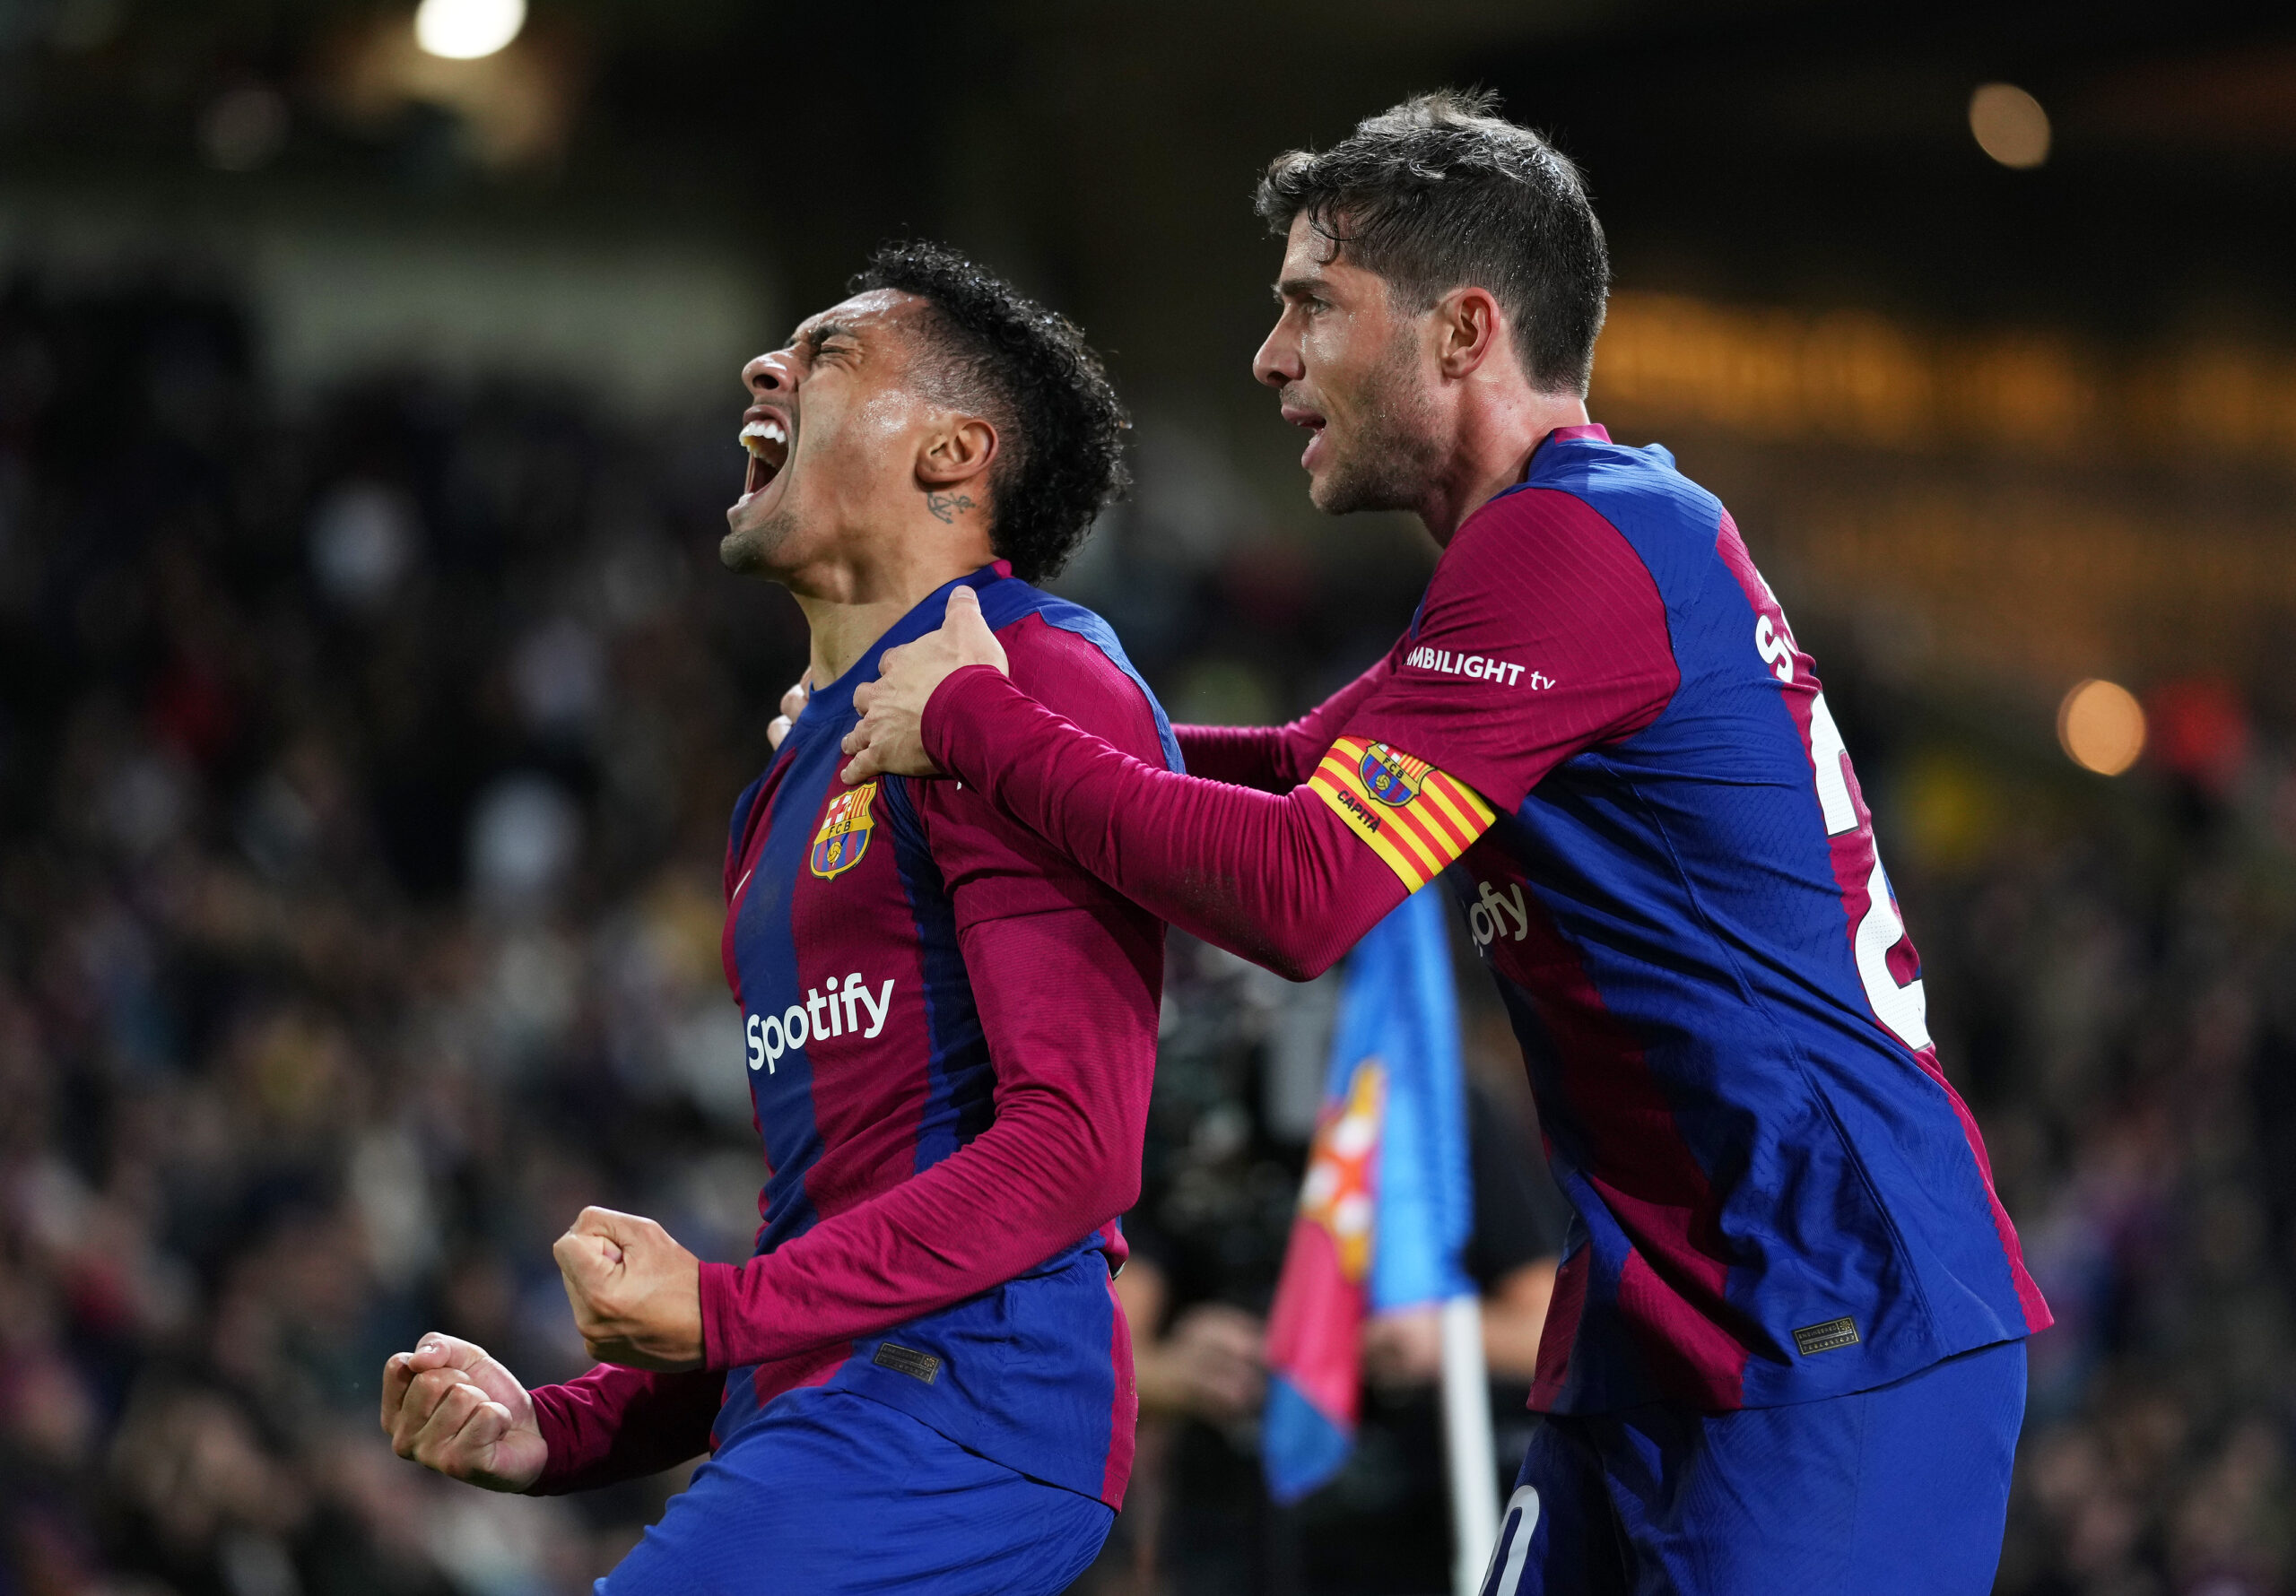 BARCELONA, SPAIN - DECEMBER 20: Raphinha of FC Barcelona celebrates with teammate Sergi Roberto after scoring their team's first goal during the LaLiga EA Sports match between FC Barcelona and UD Almeria at Estadi Olimpic Lluis Companys on December 20, 2023 in Barcelona, Spain.